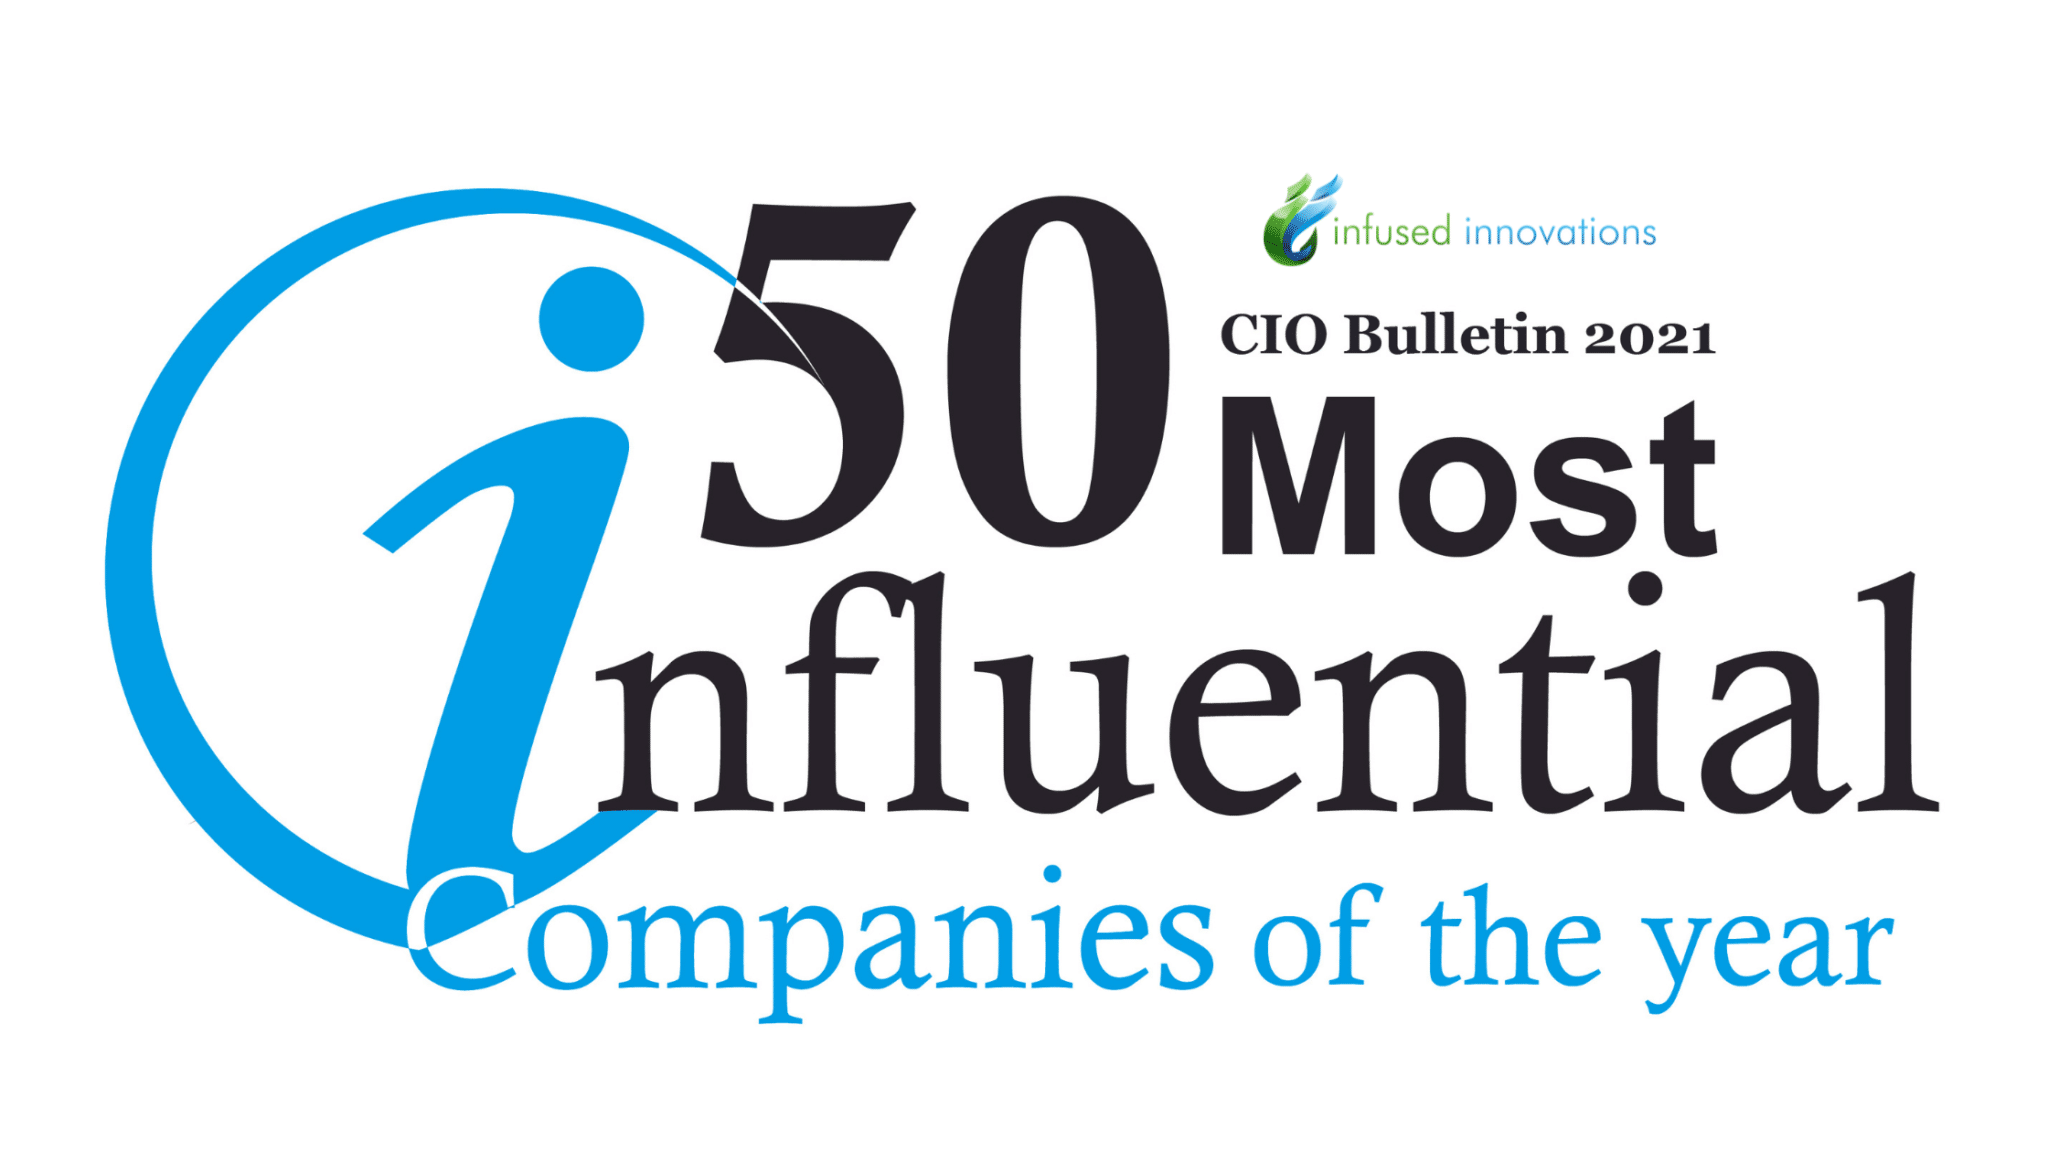 CIO Bulletin Recognizes Infused Innovations in Top 50 Most Influential Companies of the Year 2021 8